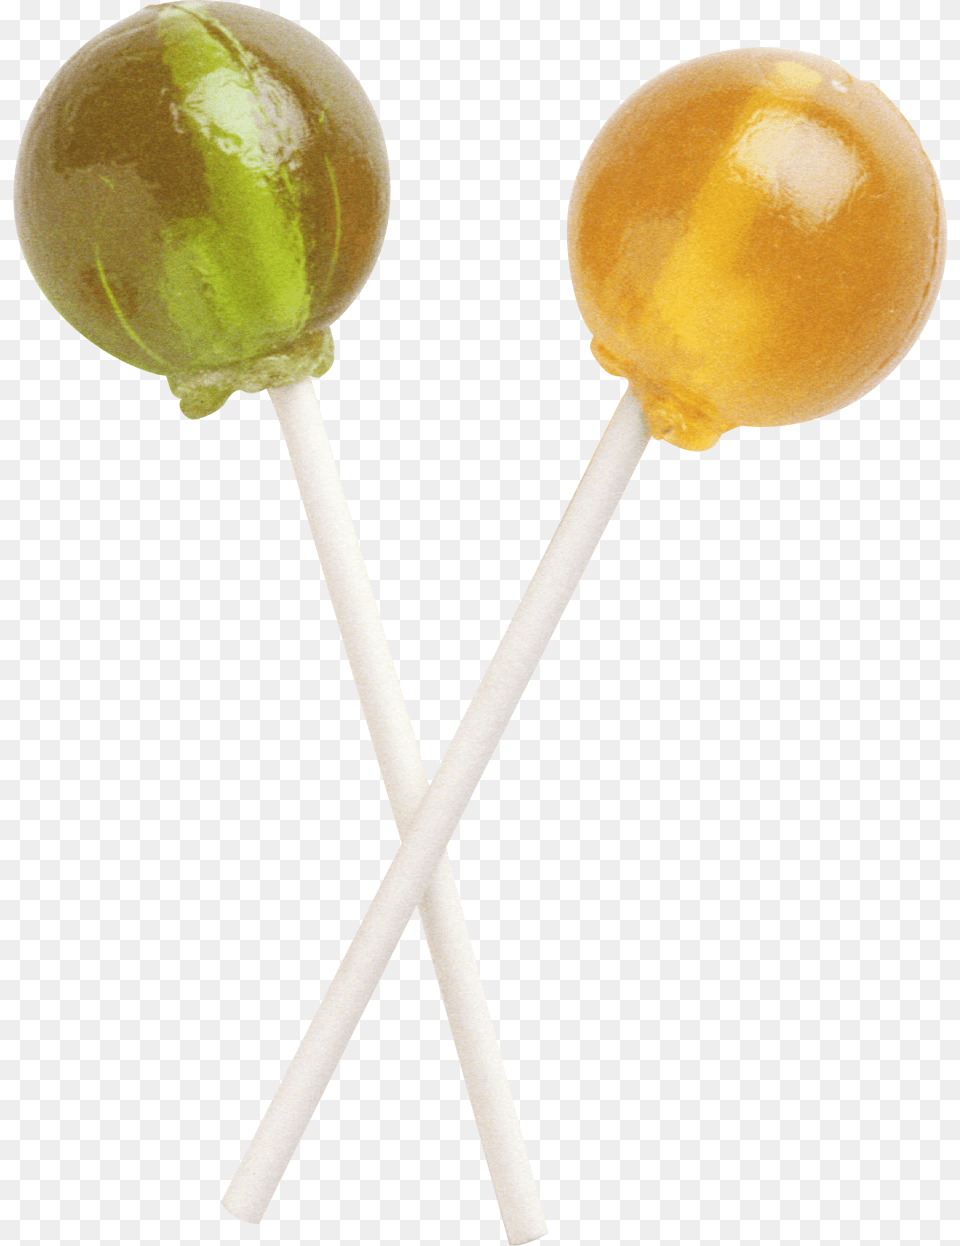 Lollipop, Candy, Food, Sweets, Ball Png Image